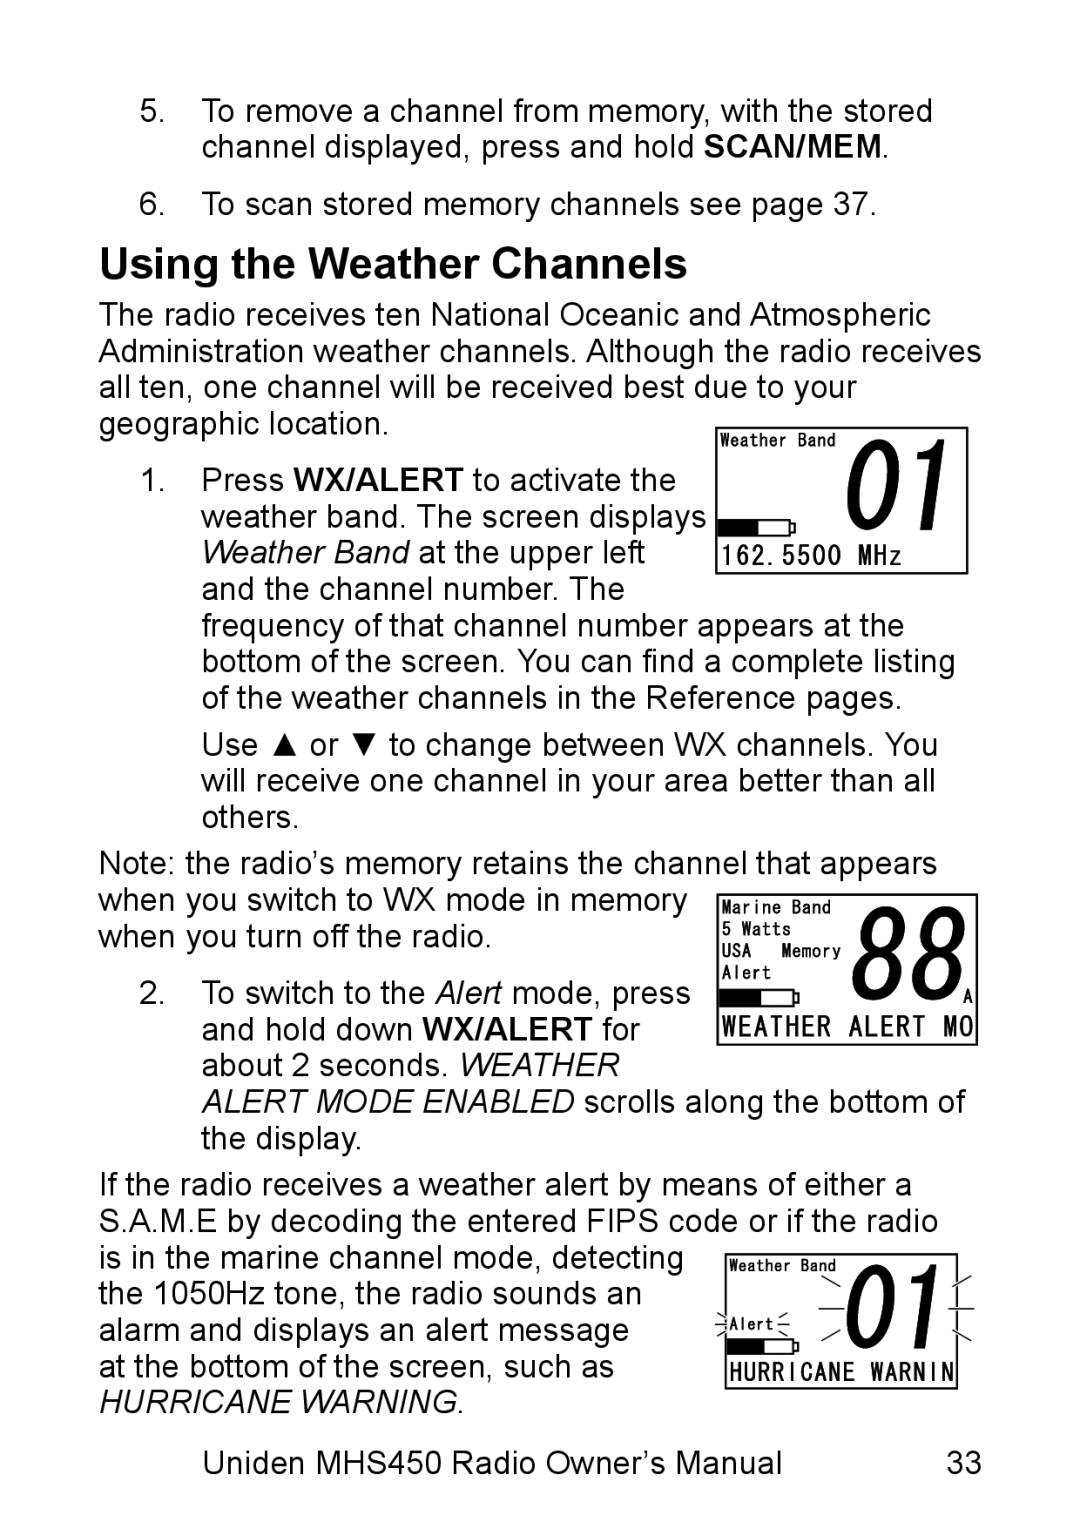 Uniden MHS450 owner manual Using the Weather Channels, Weather Band at the upper left and the channel number 